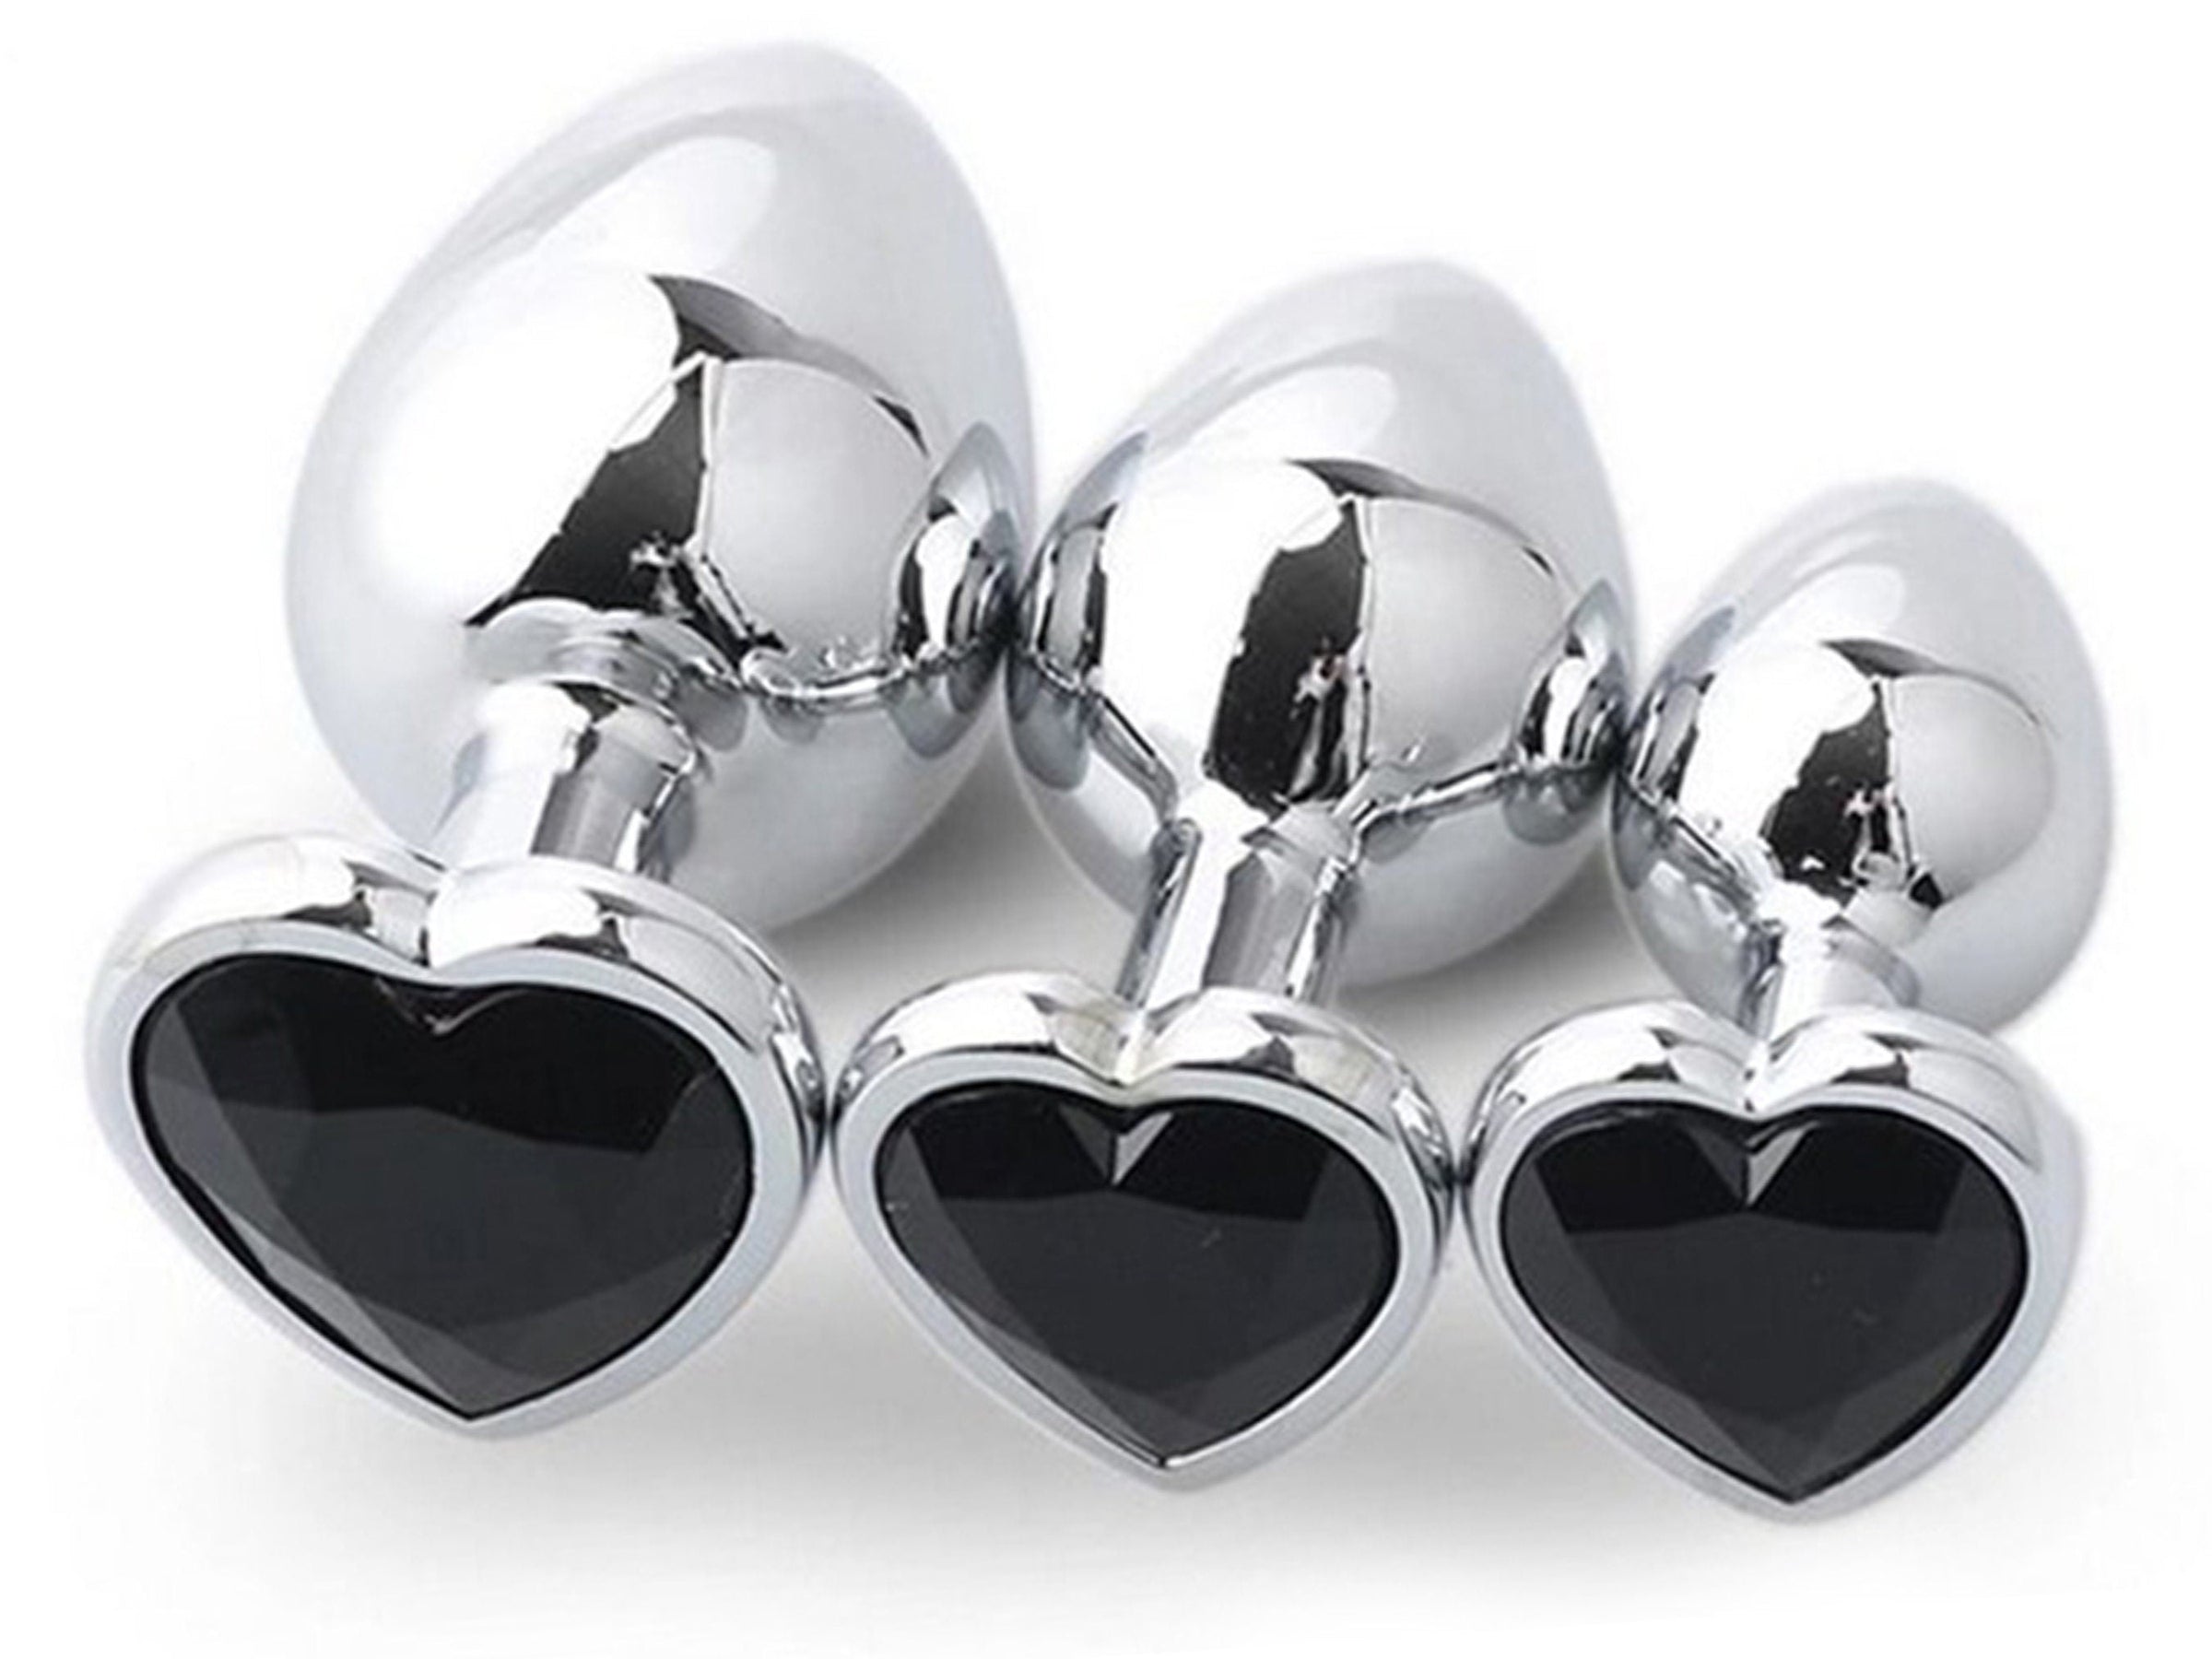 BLACK HEART Shaped Acrylic Crystal Butt plug 3 sizes anal toy sex jewe image picture